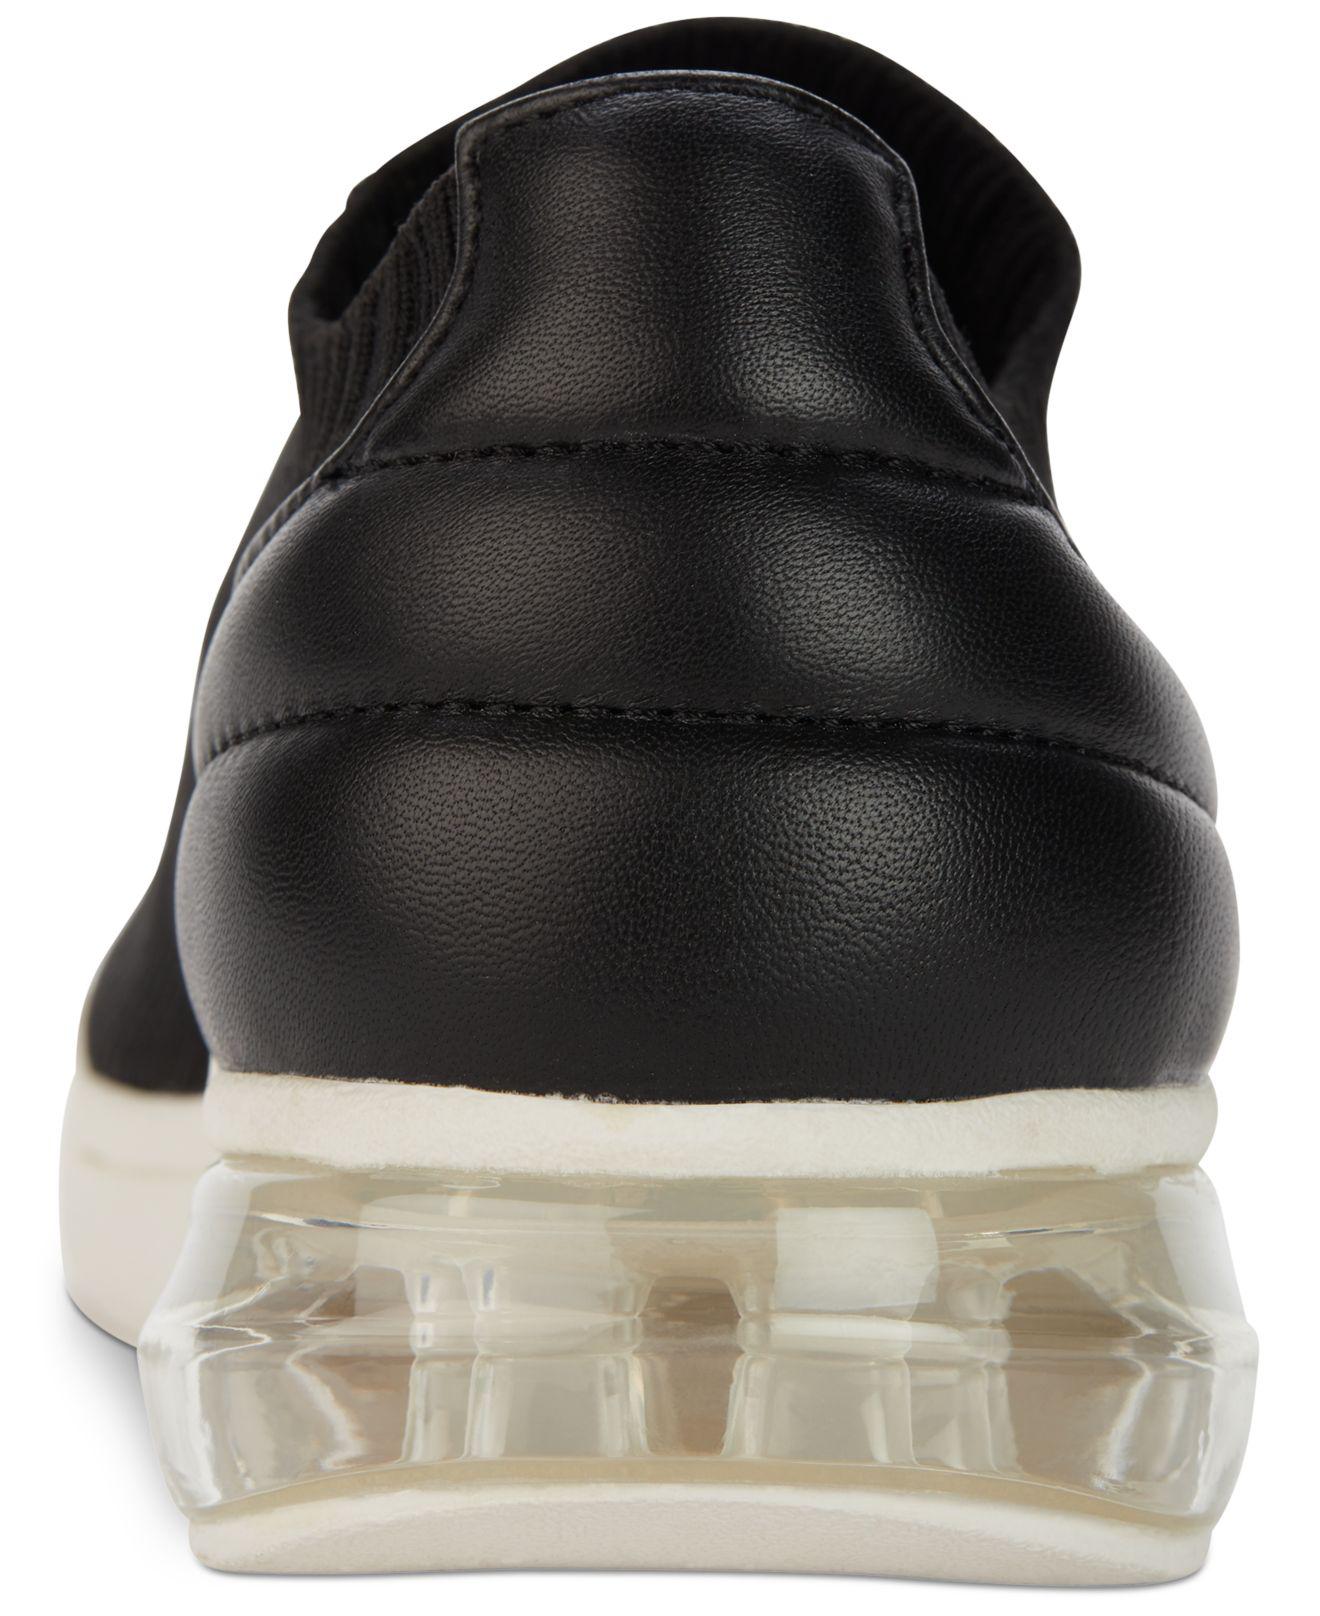 DKNY Neptune Sneakers, Created For Macy 